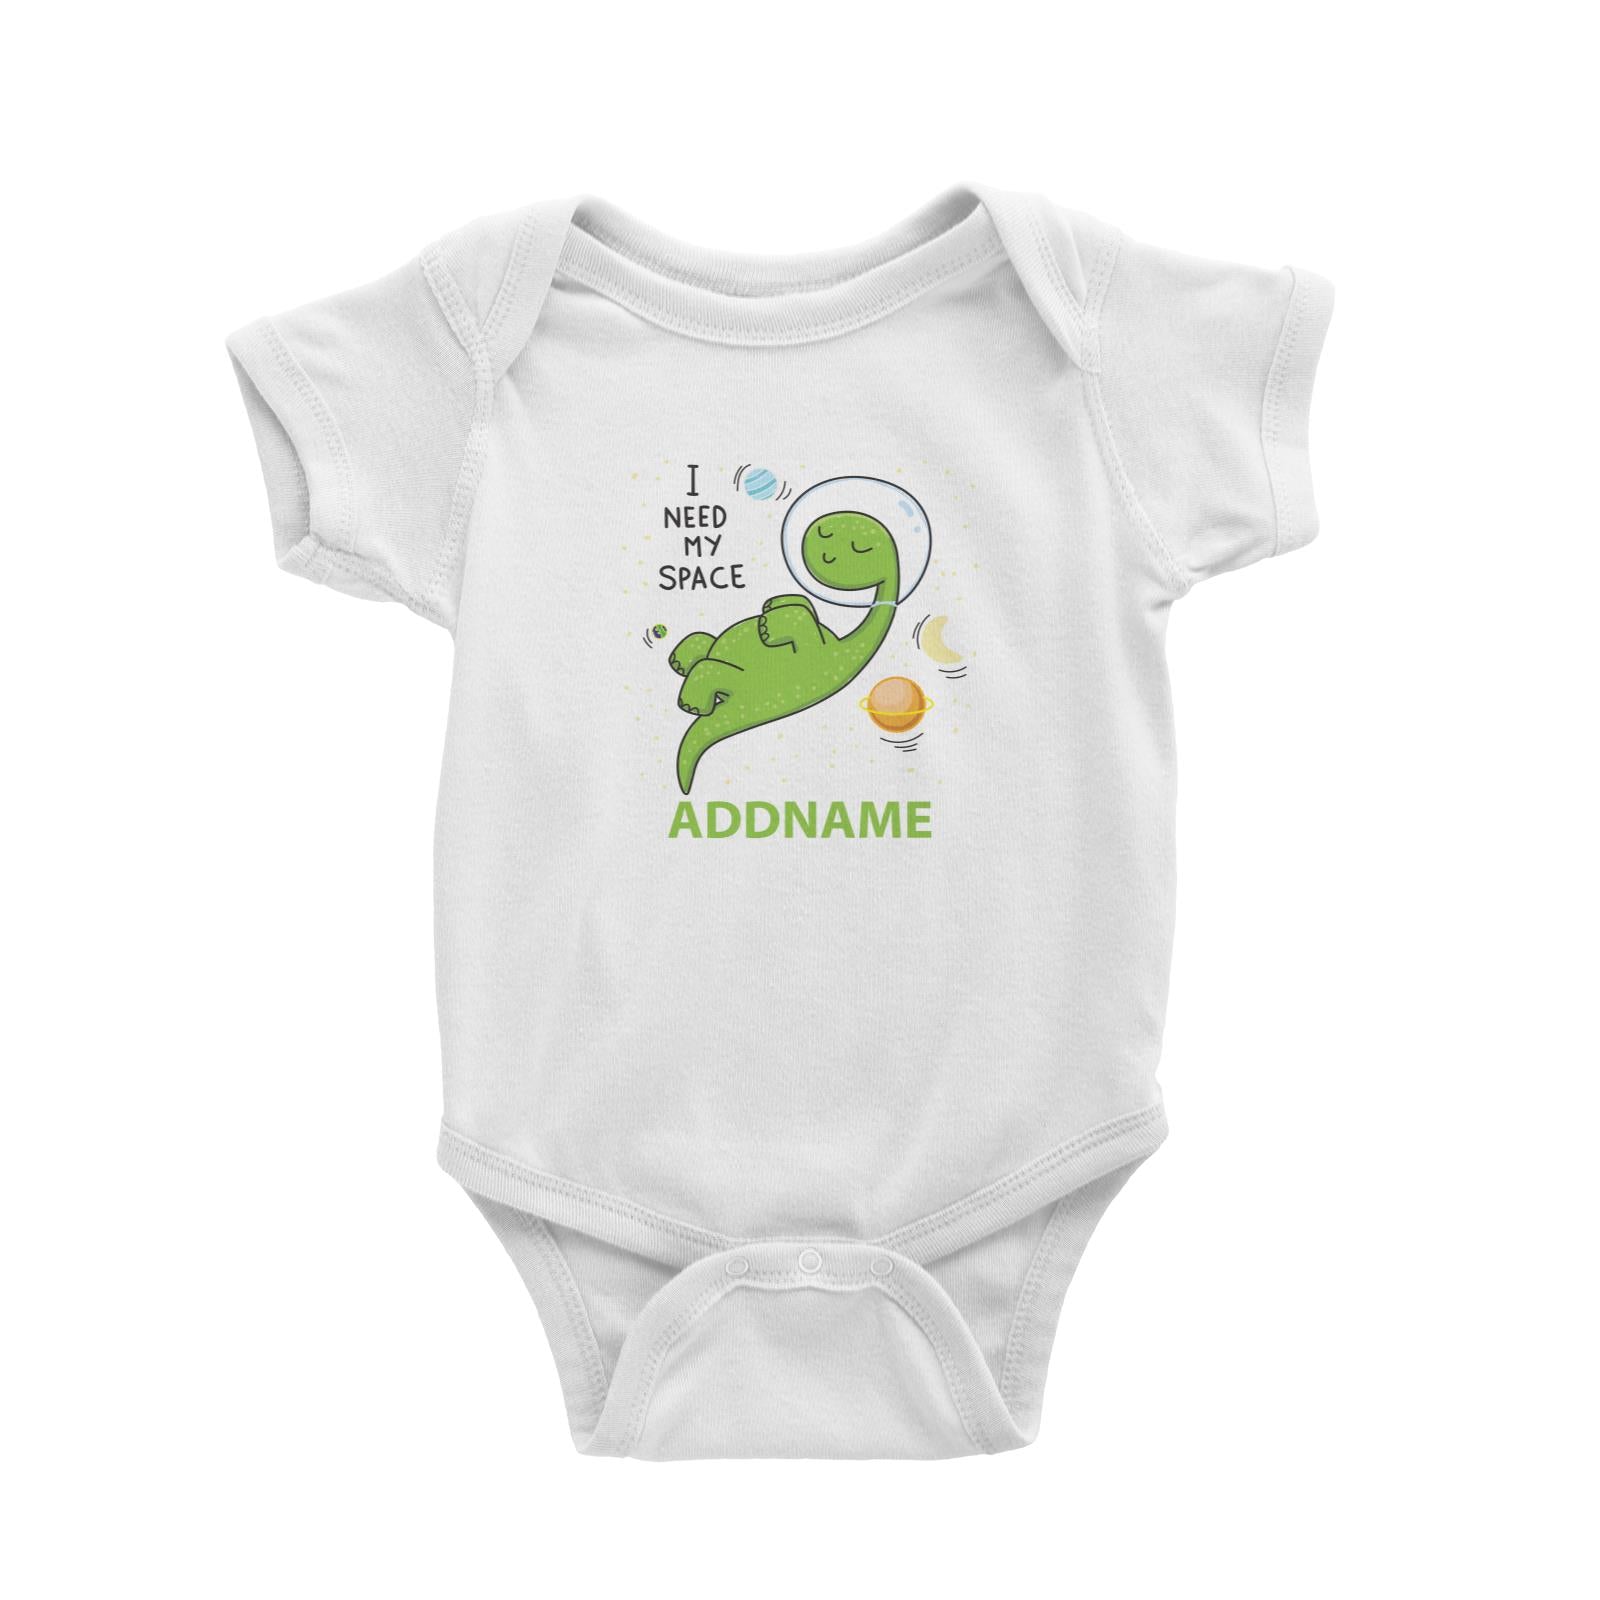 Cool Cute Dinosaur I Need My Space Addname Baby Romper